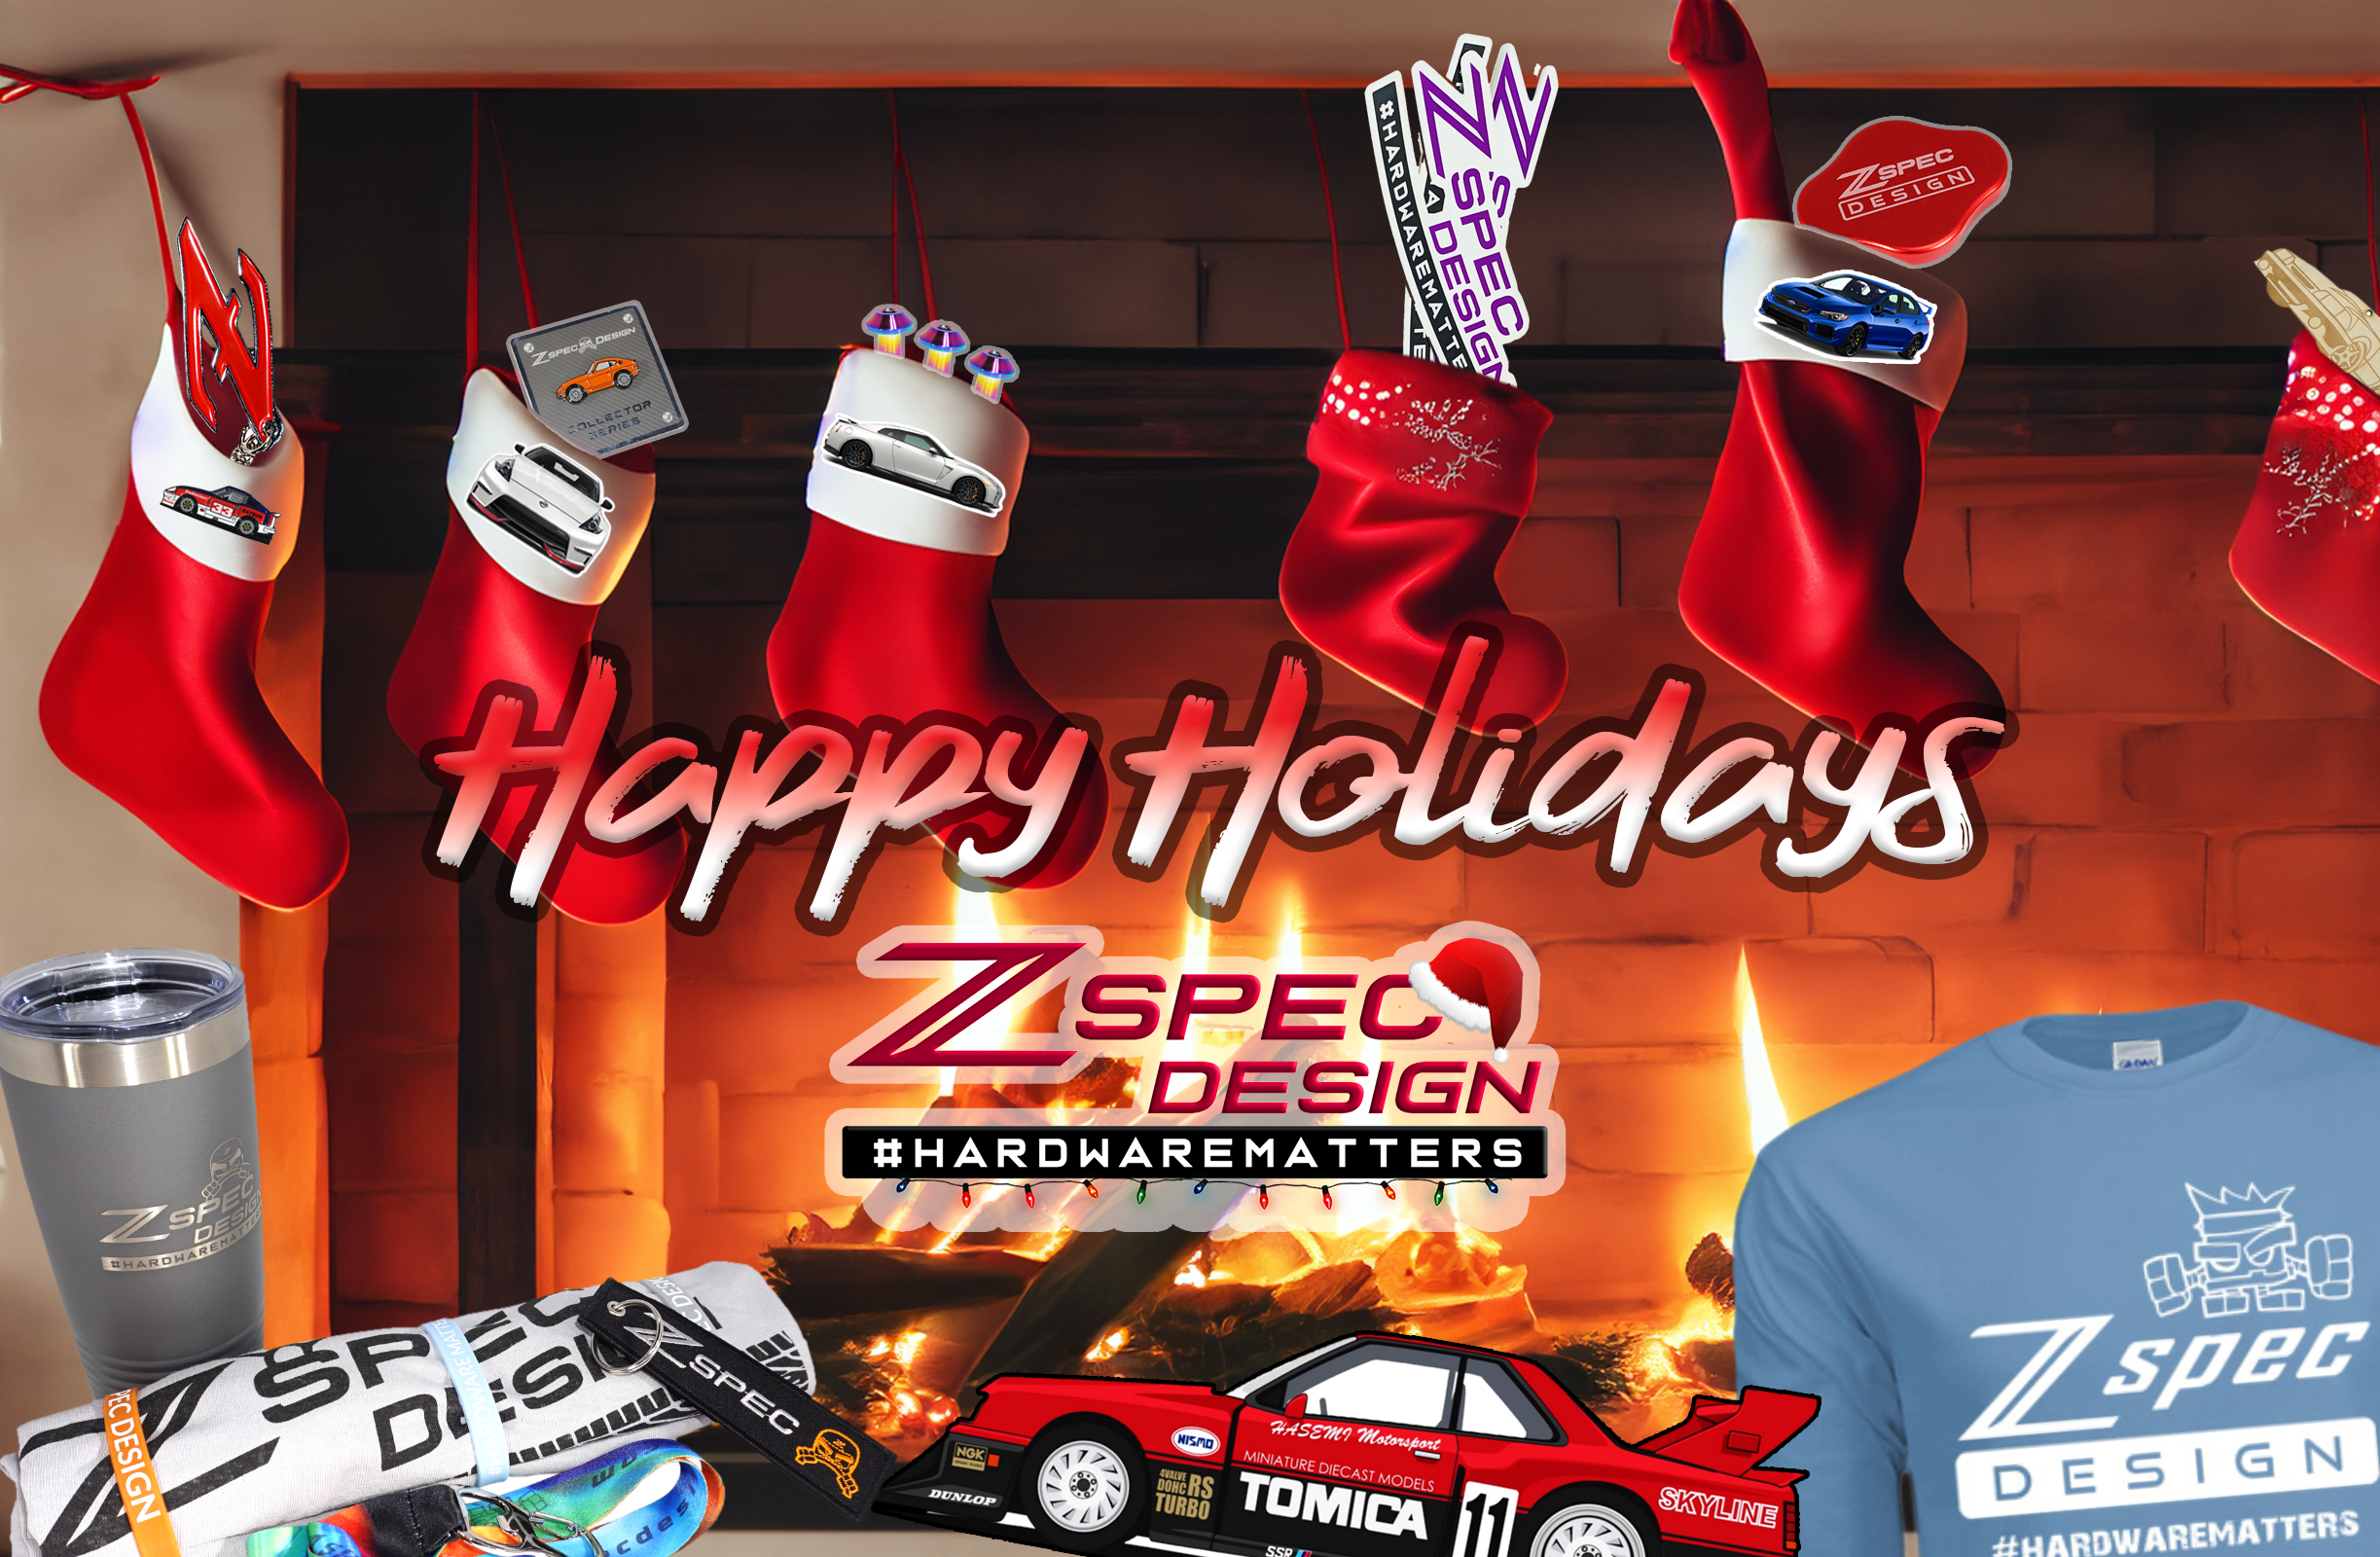 Happy Holidays from ZSPEC - here are some last minute gift ideas (great stocking stuffers!)